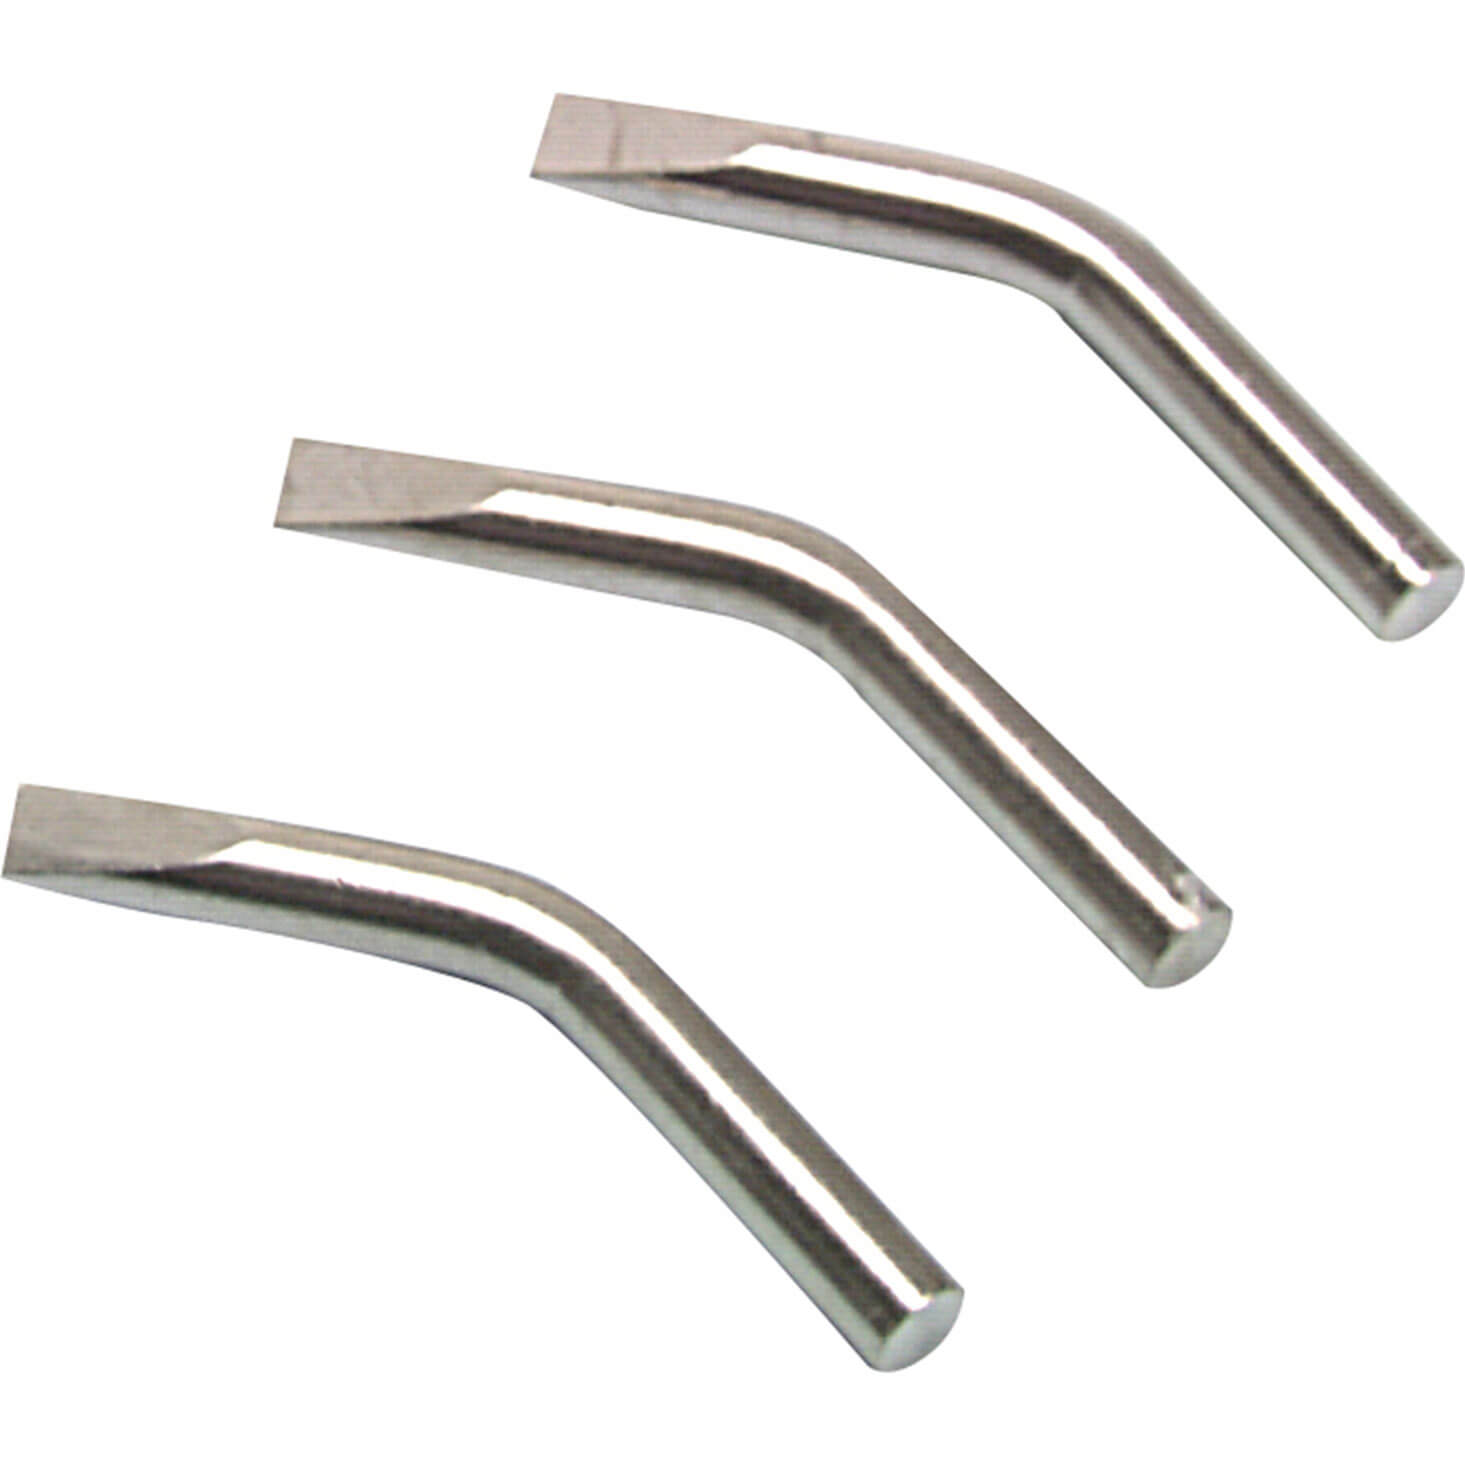 Weller S4 Bent Tips (3) For Si40